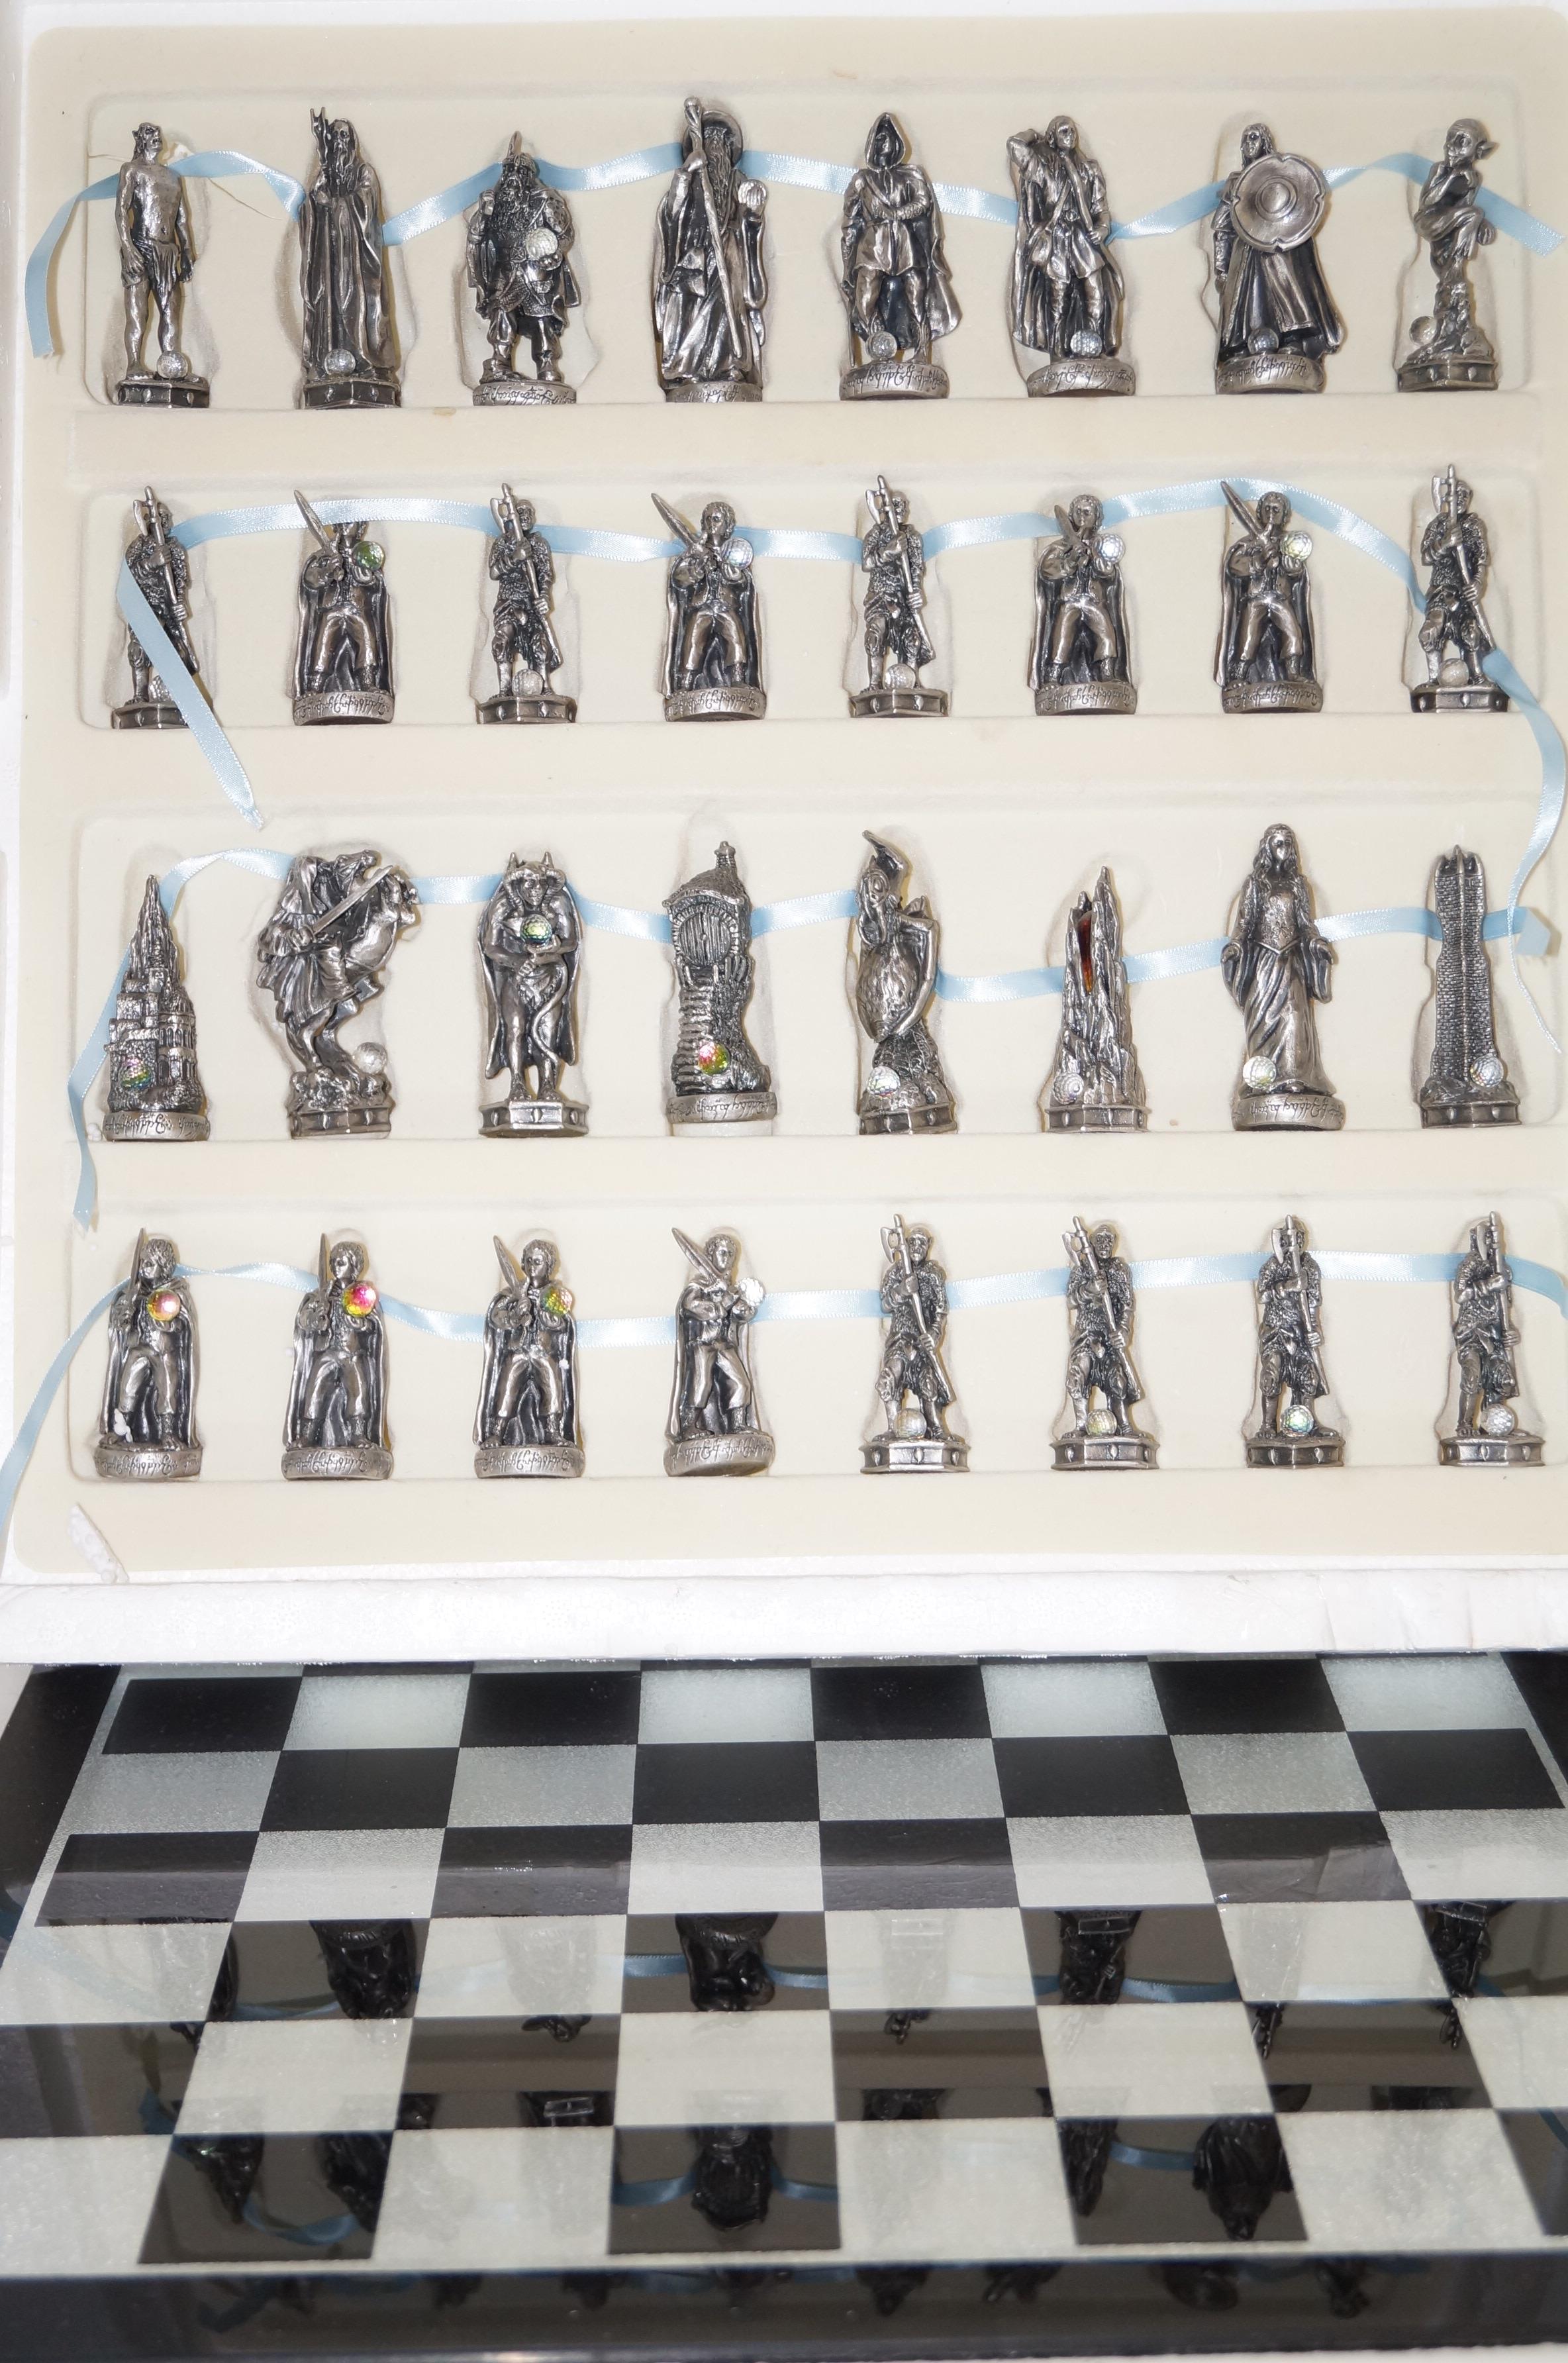 Lord of the Rings chess set form the Tudor Mint, g